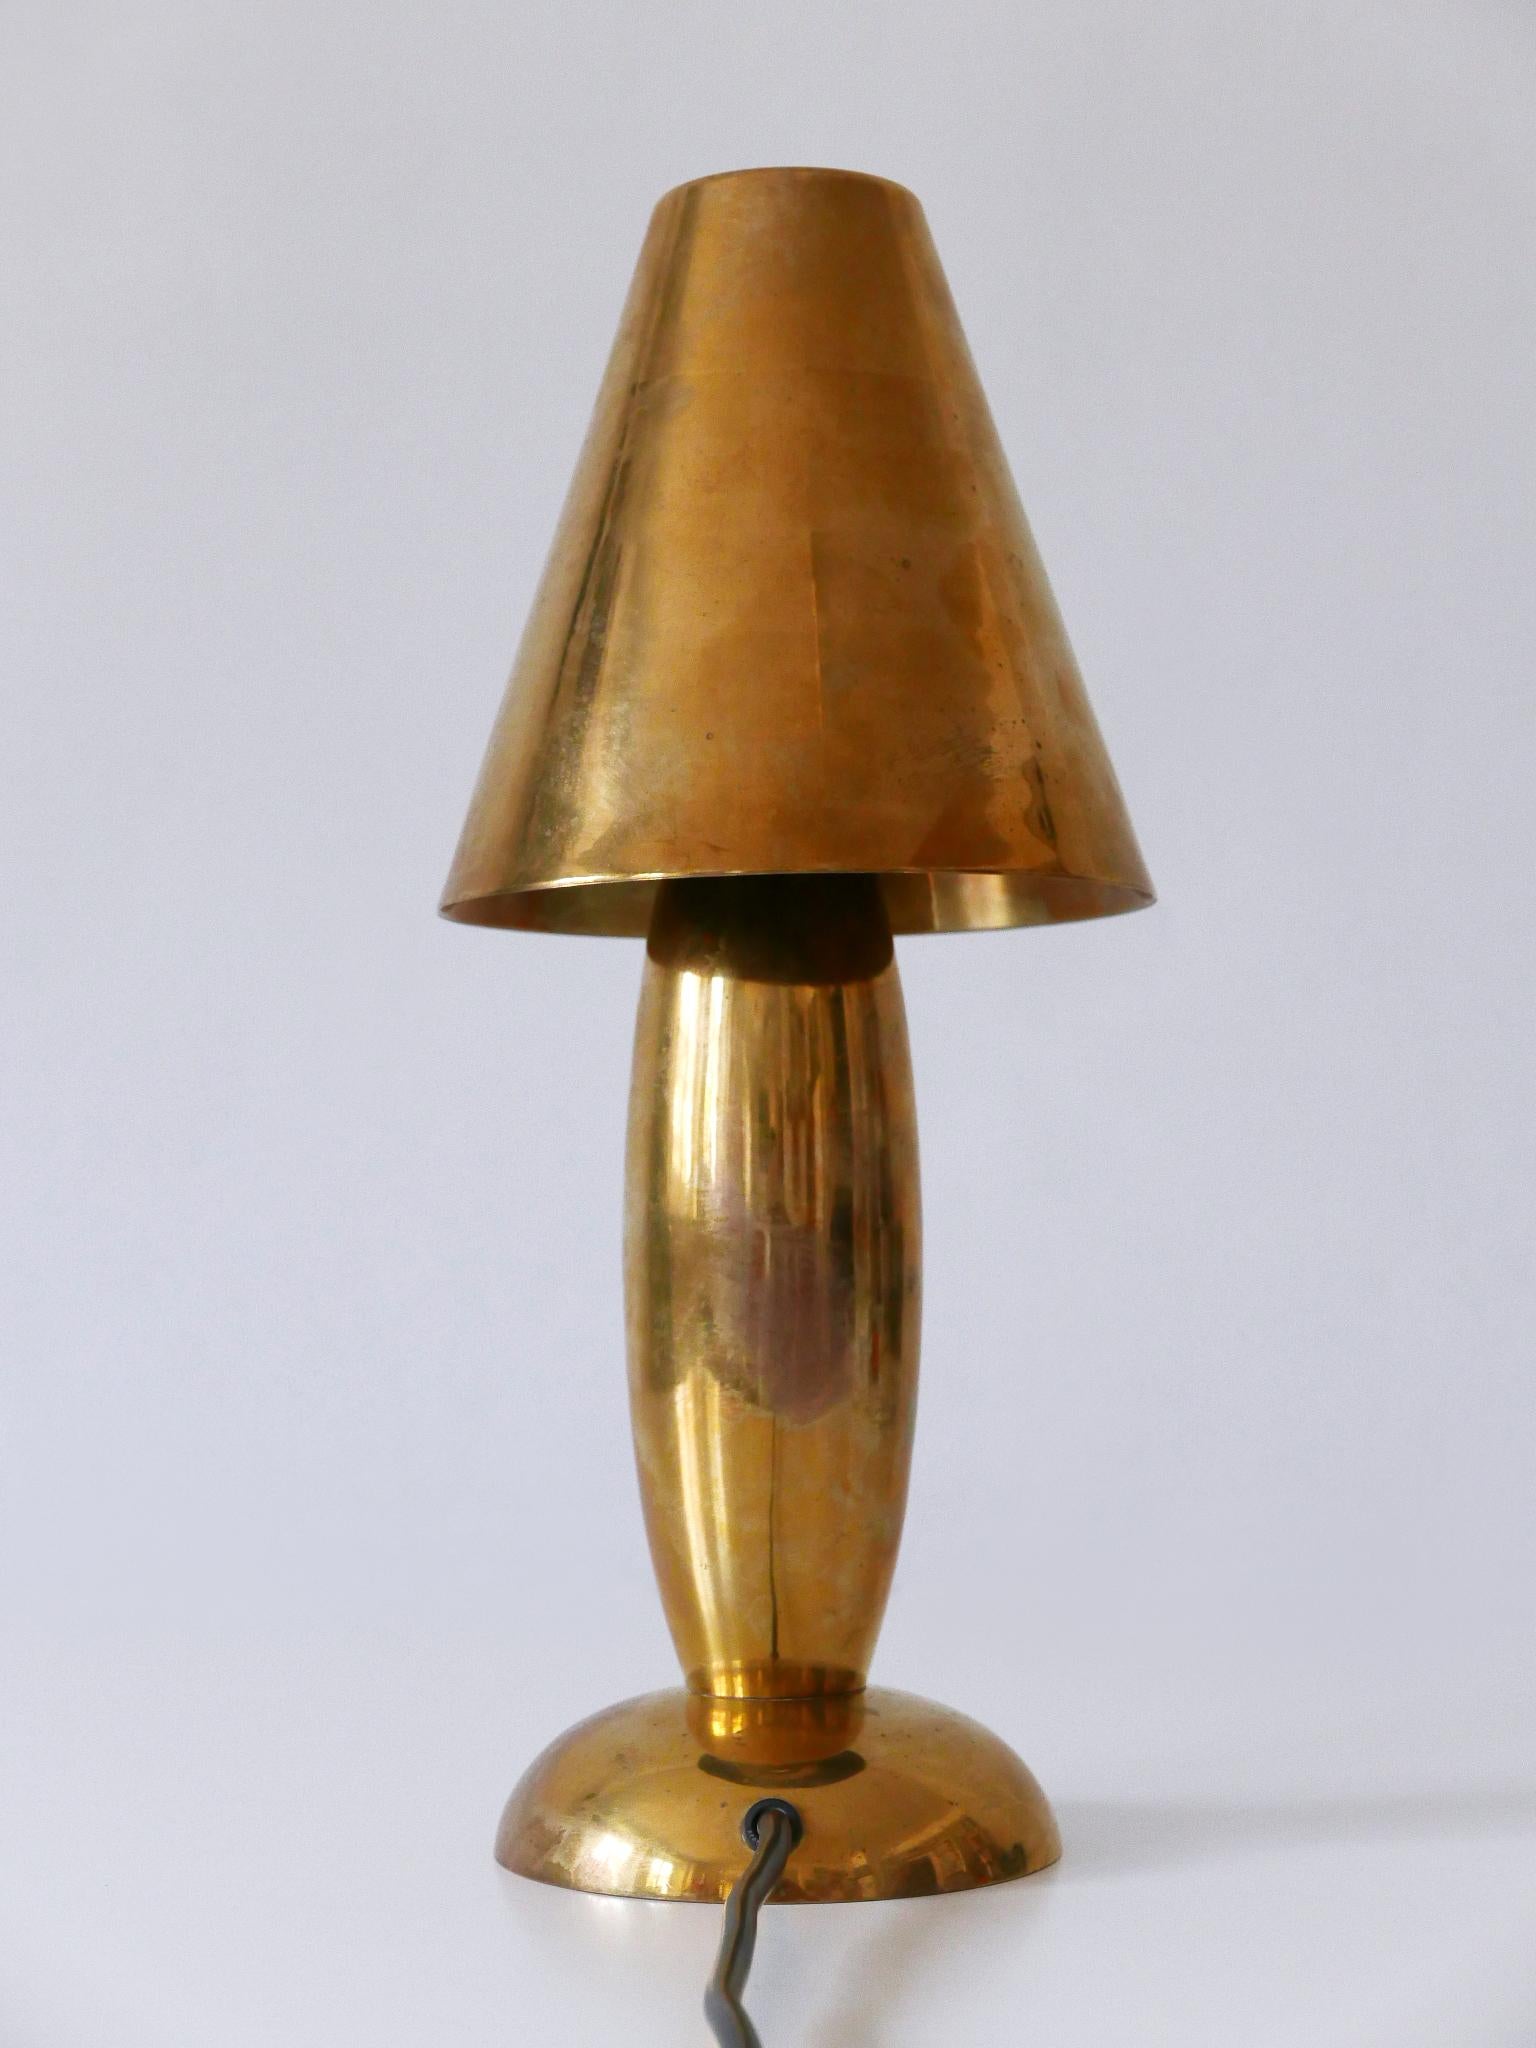 Rare & Lovely Mid-Century Modern Brass Side Table Lamp by Lambert Germany 1970s For Sale 12